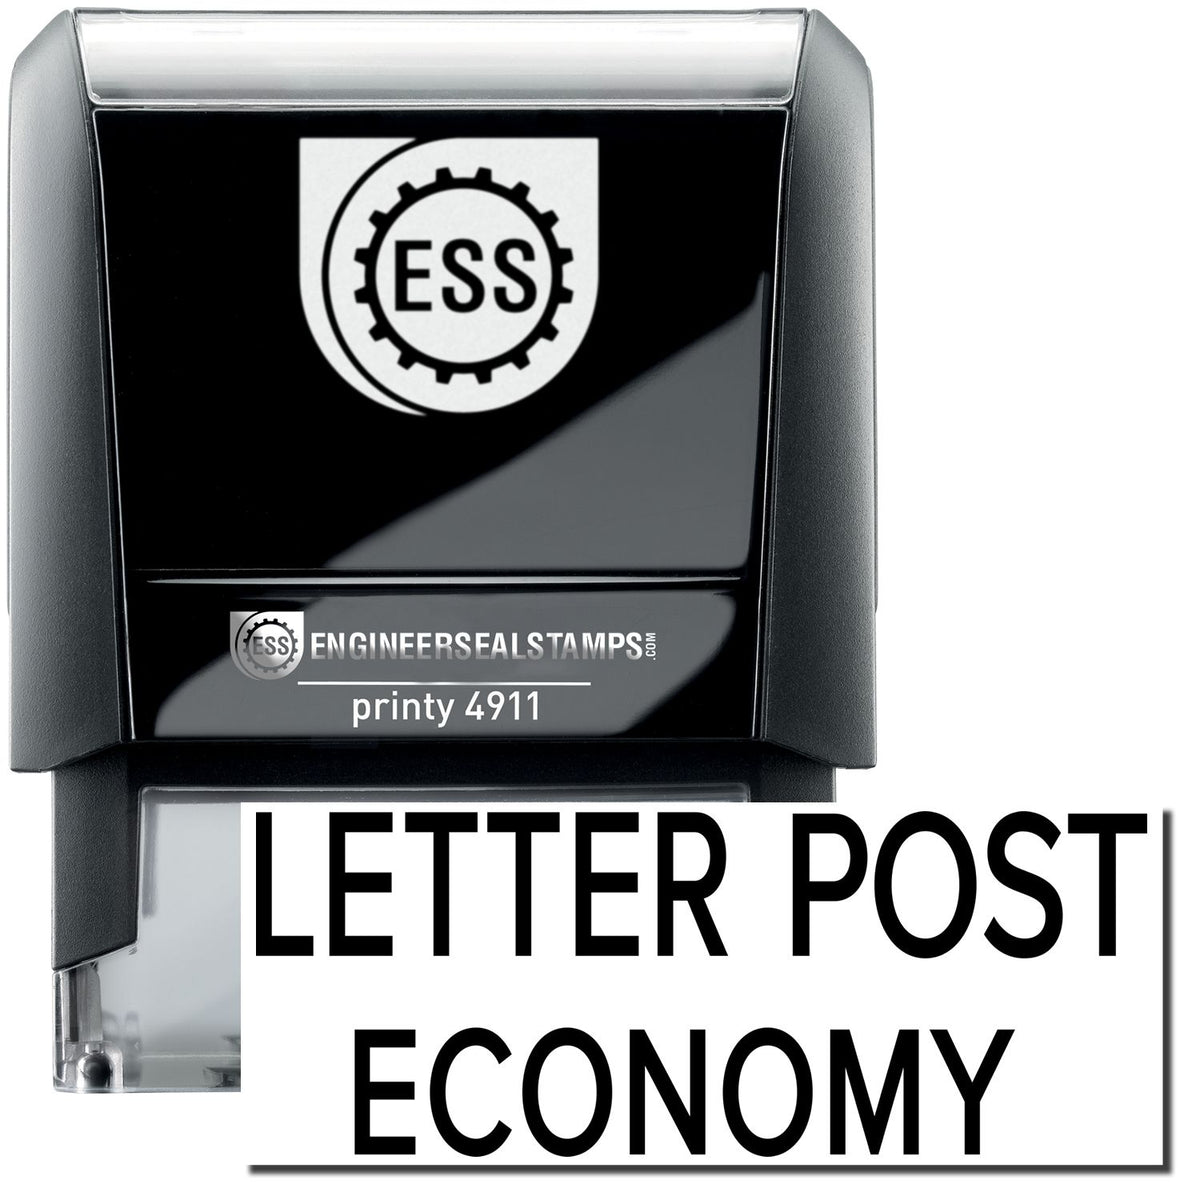 A self-inking stamp with a stamped image showing how the text &quot;LETTER POST ECONOMY&quot; is displayed after stamping.